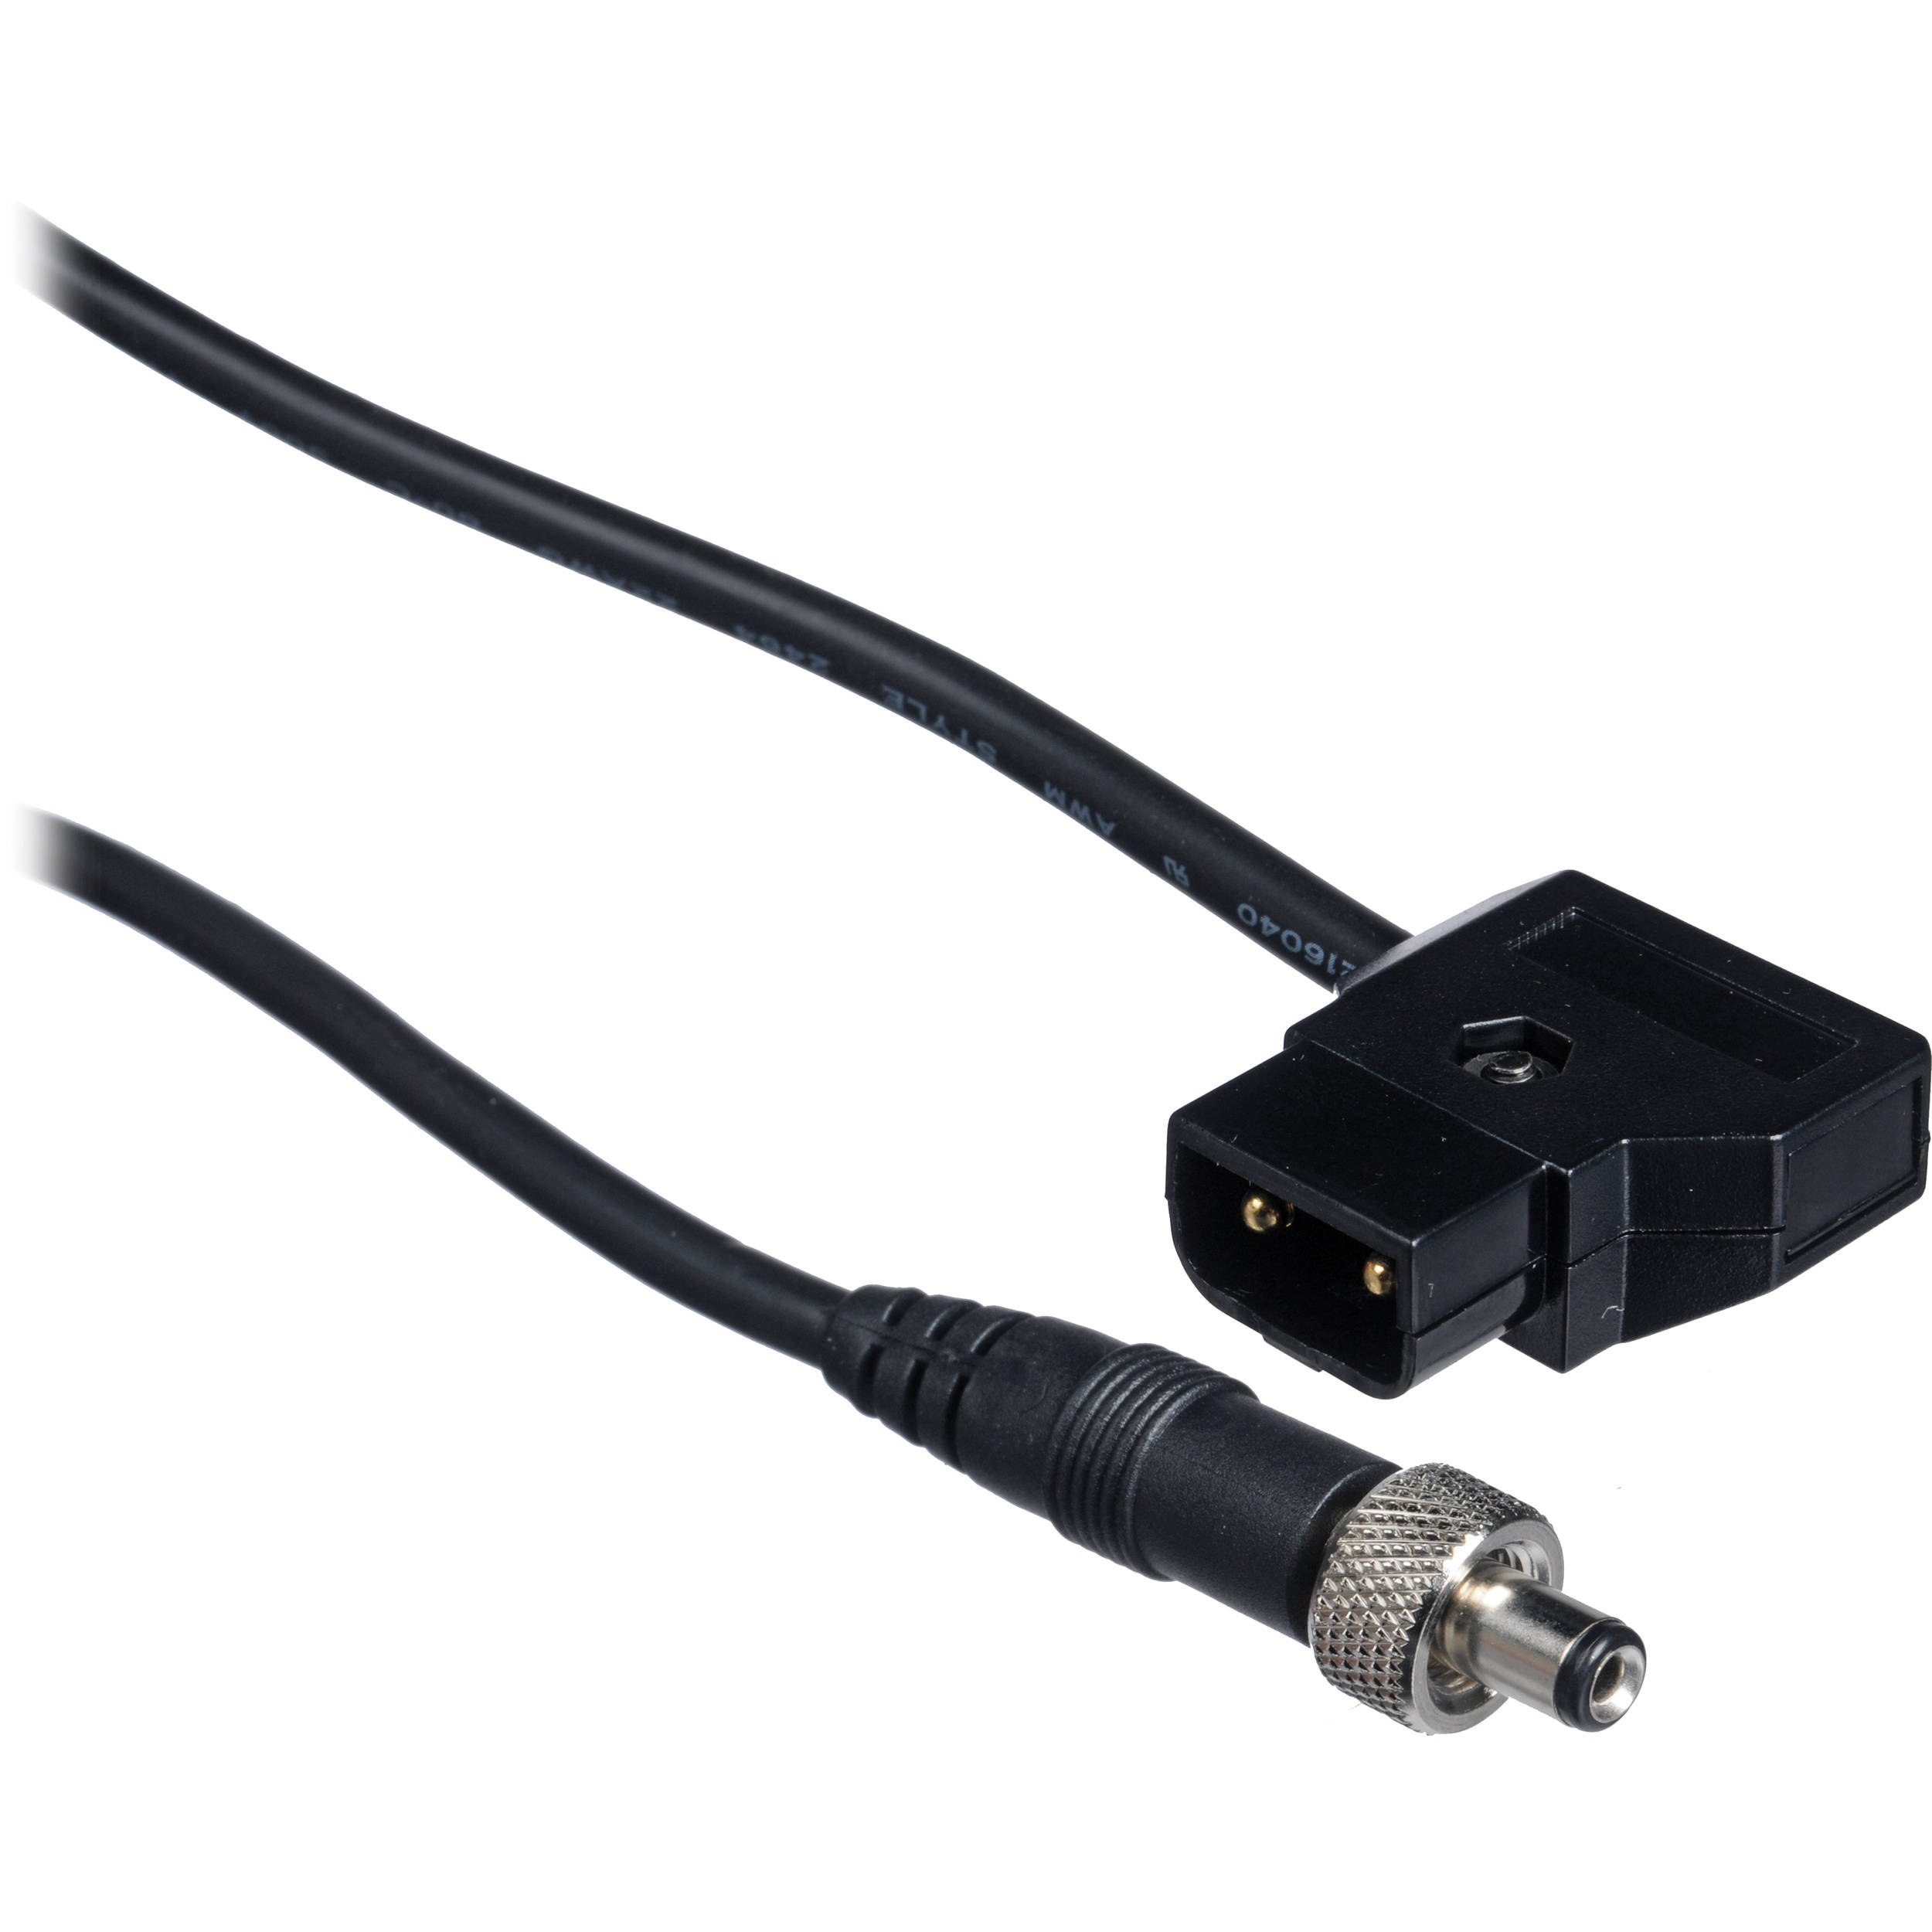 Paralinx PowerTap Cable for Paralinx Crossbow